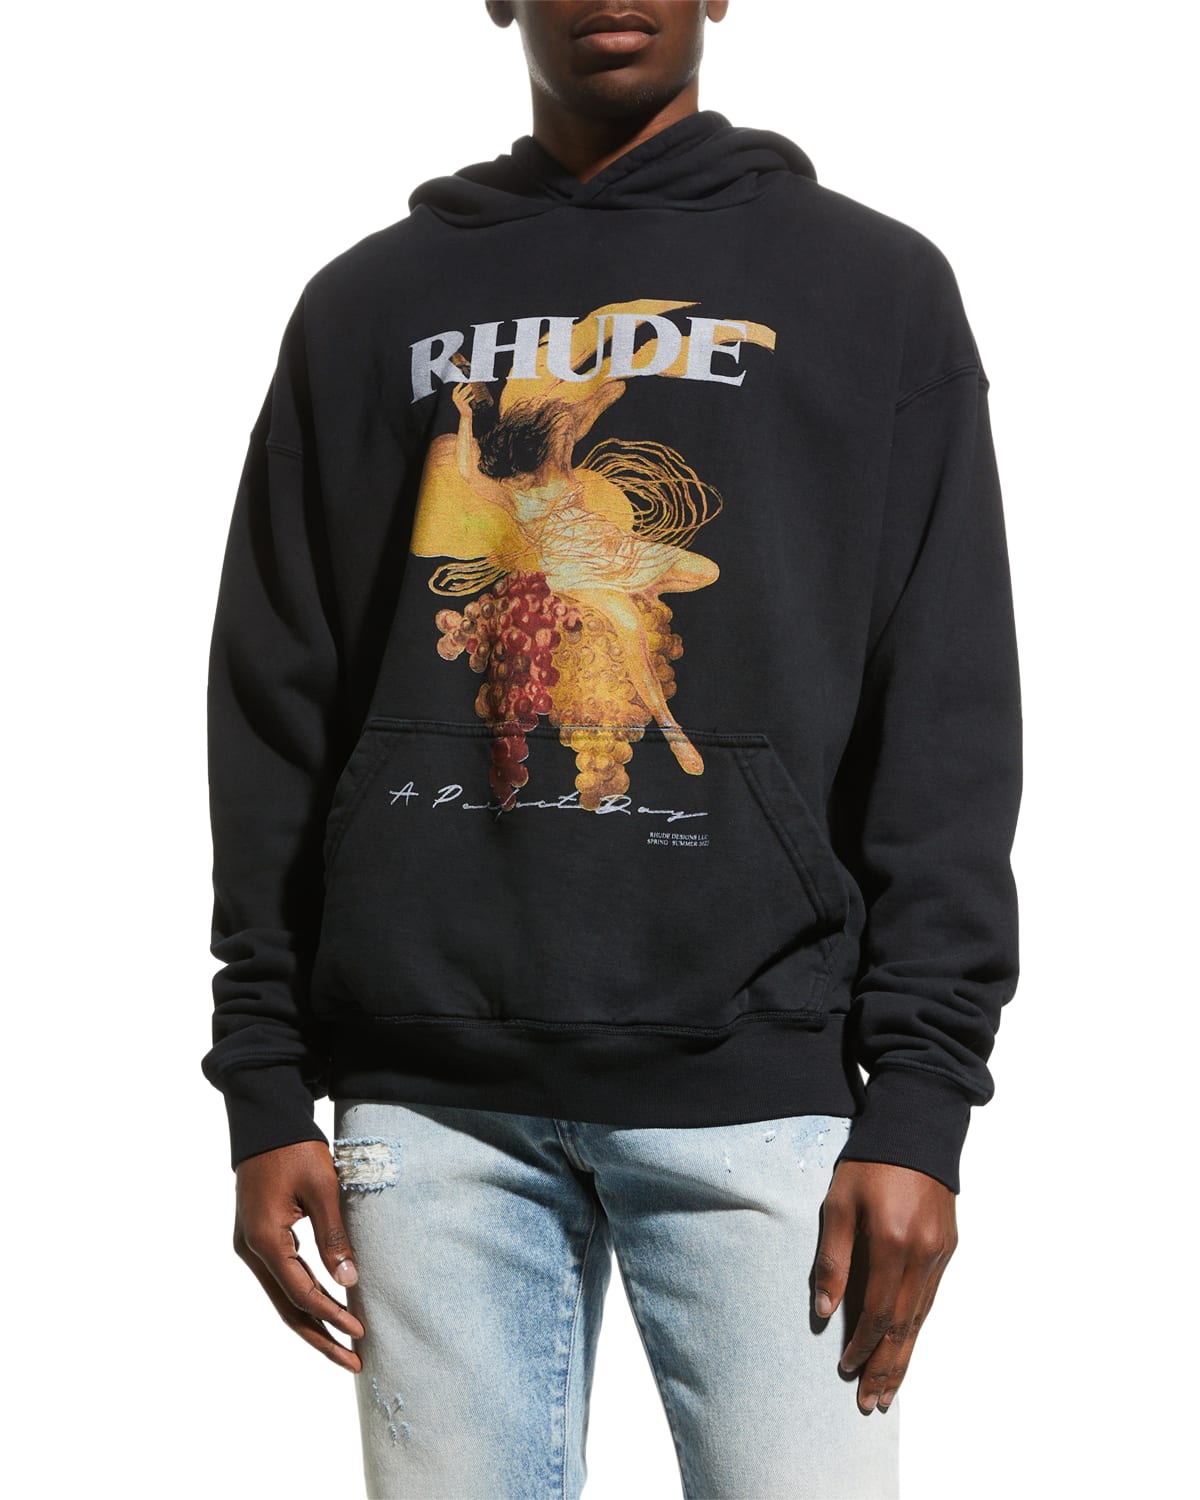 Men's A Perfect Day Graphic Hoodie